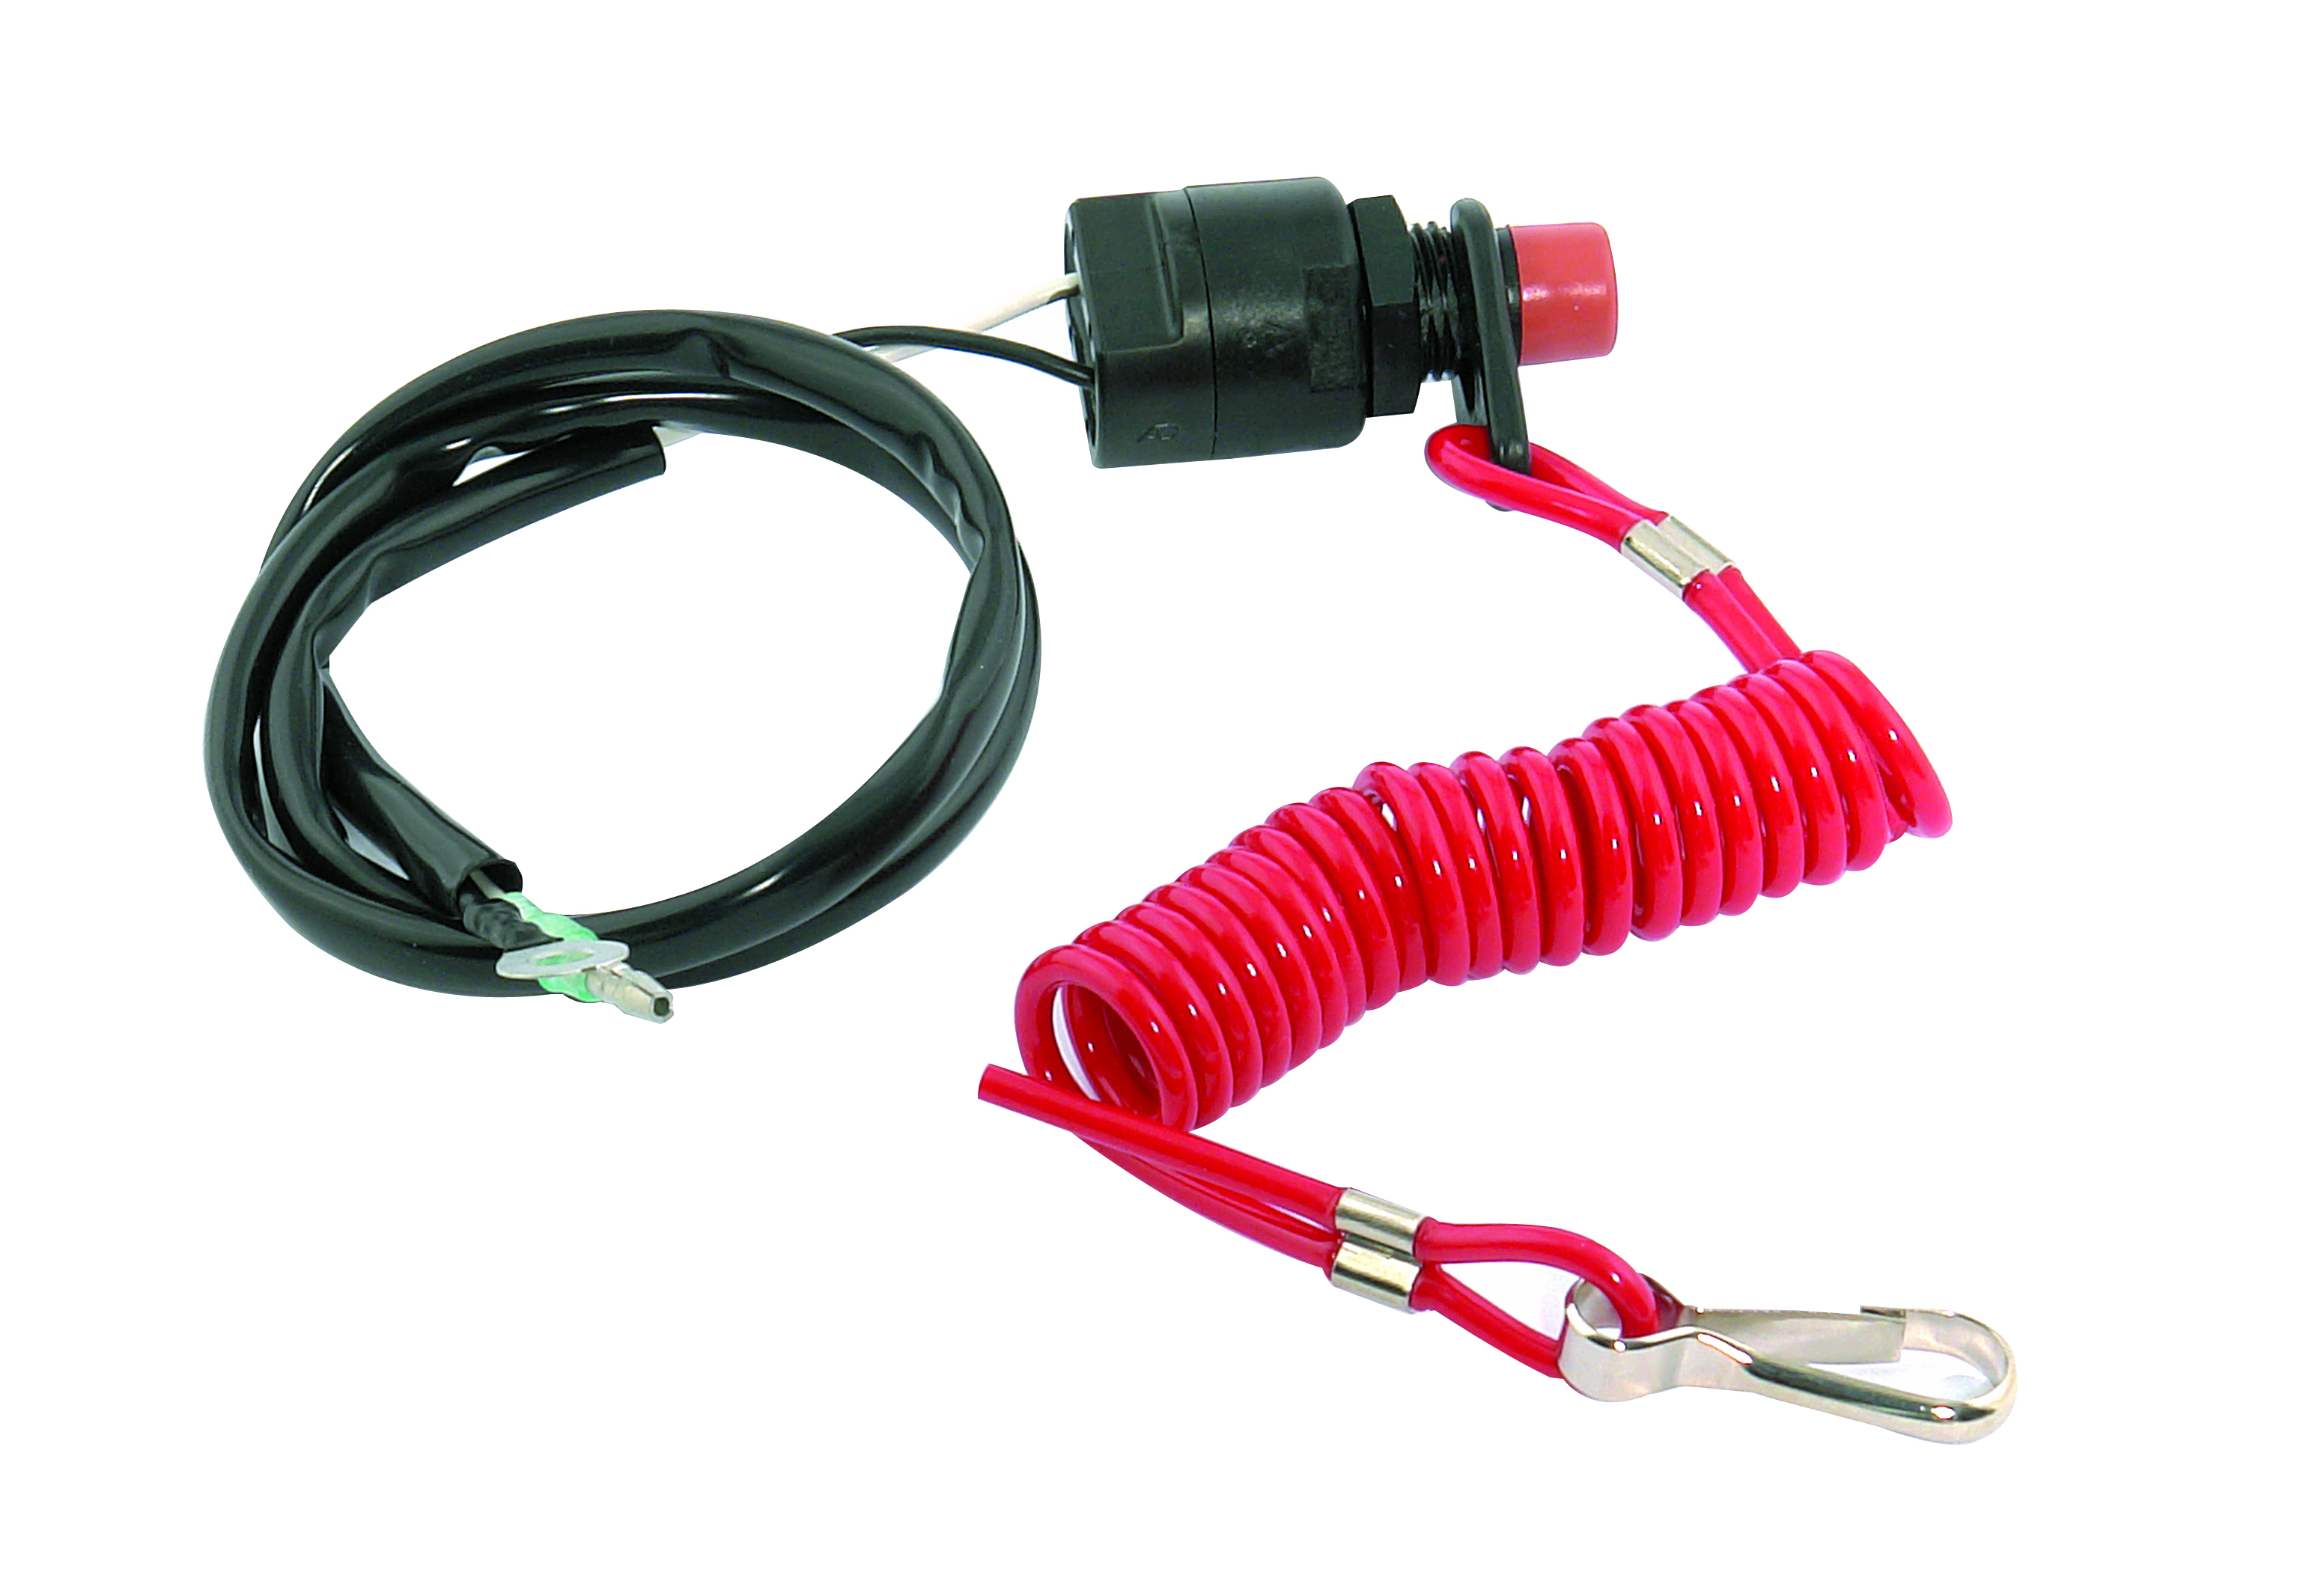 TH Marine L-4 Replacement Lanyard For Ignition Kill Switches 